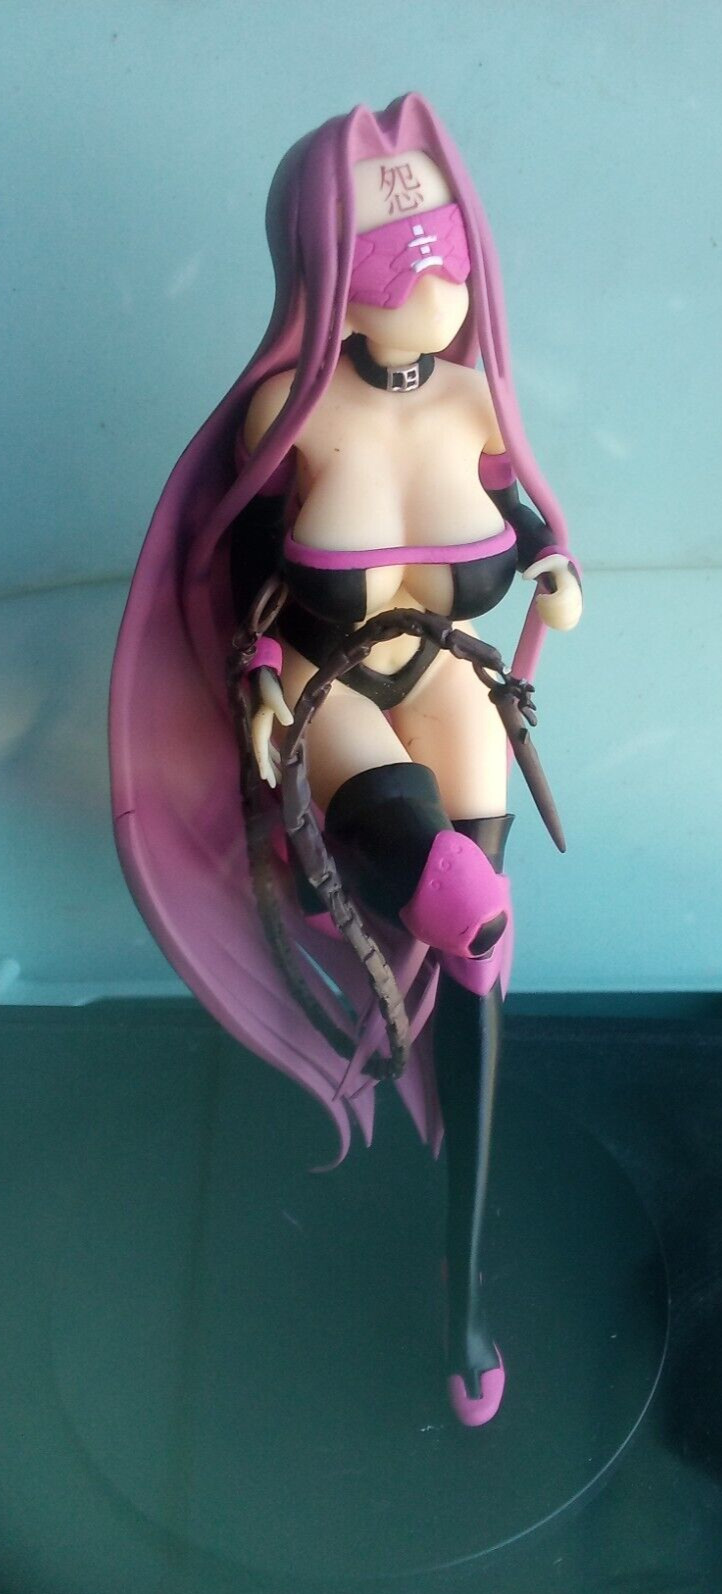 Madusa Rider 1/7 Scale Figure Anime Fate Stay Night Japan